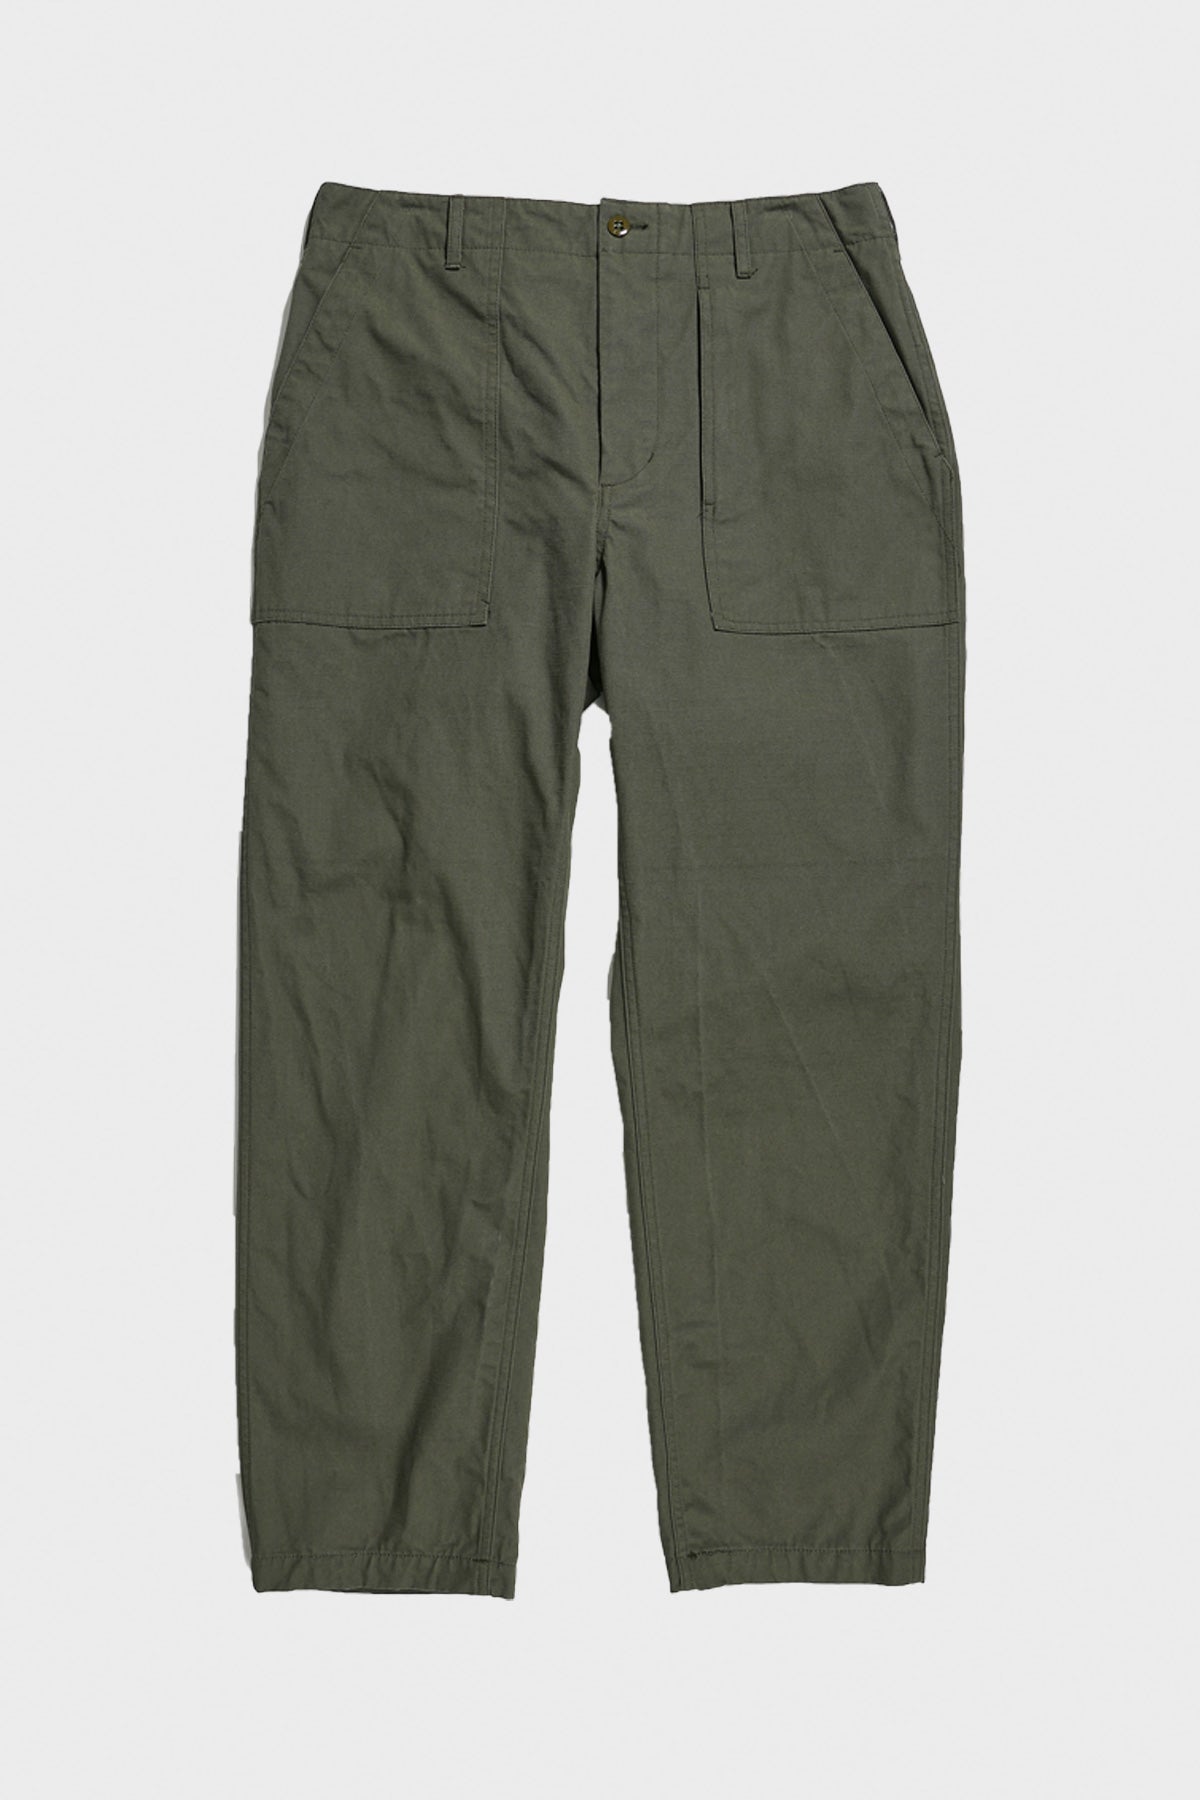 Engineered Garments Fatigue Pant | Olive Cotton Heavyweight Ripstop ...